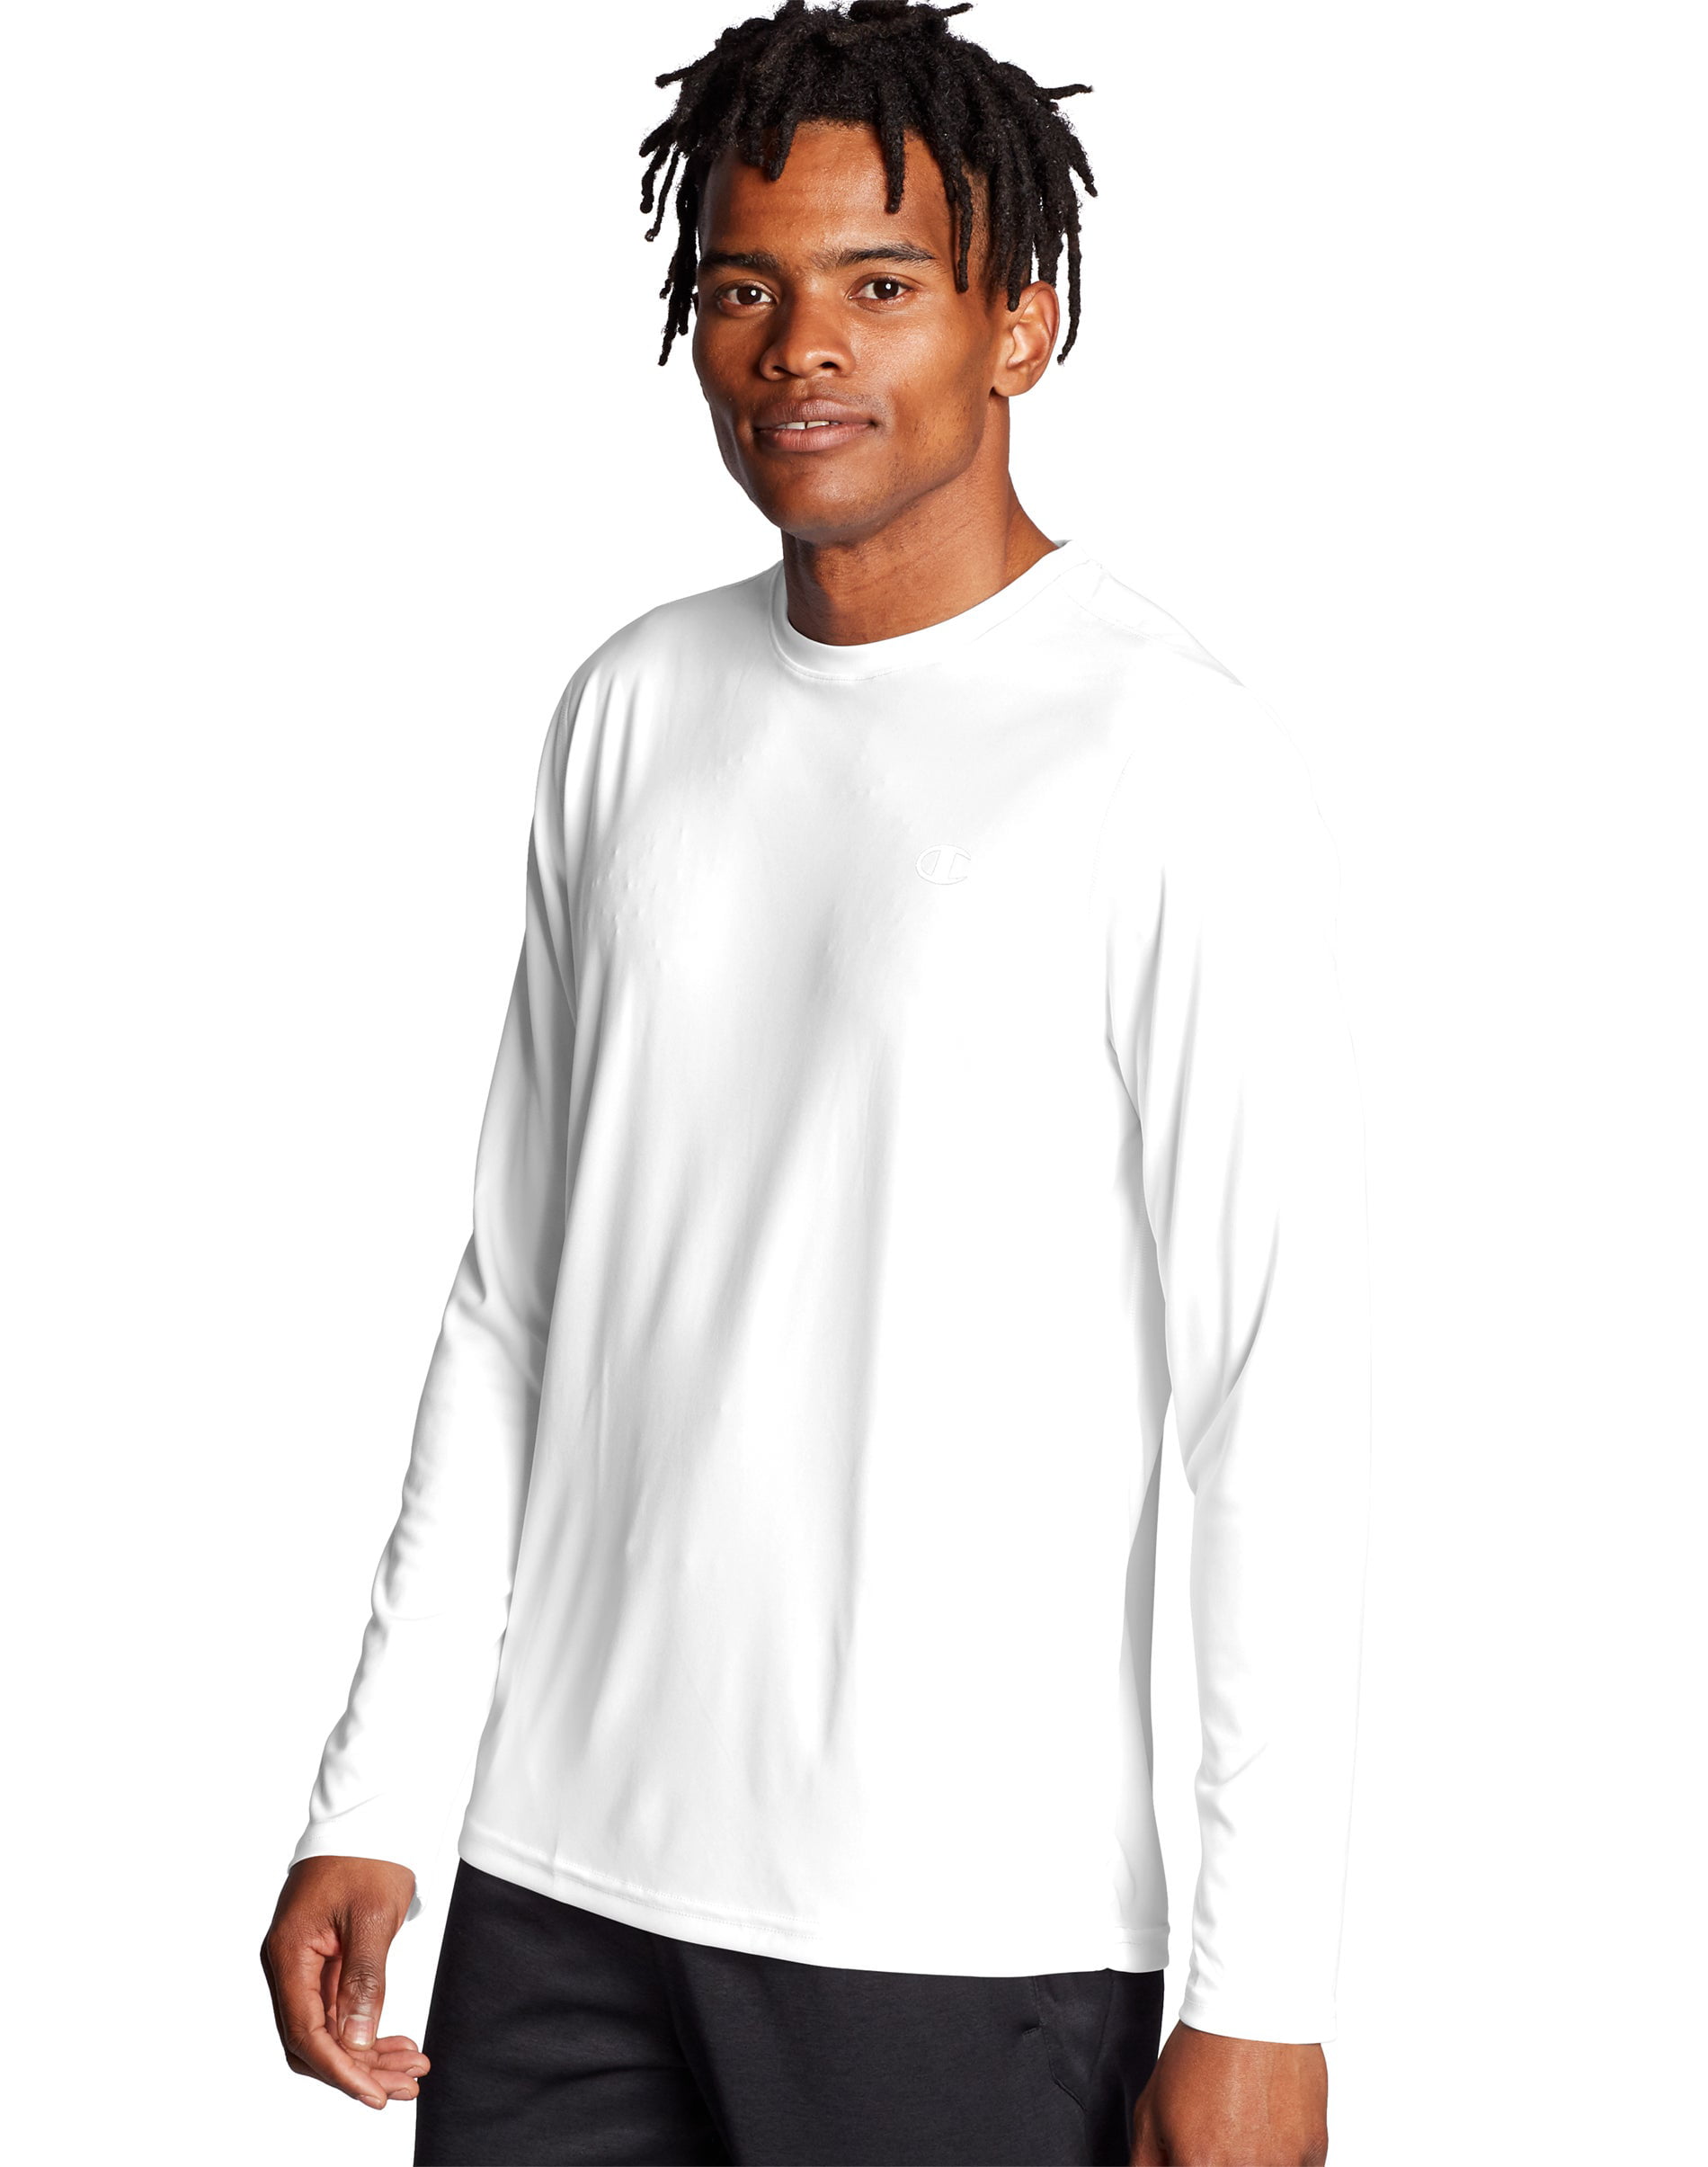 Champion T-Shirt Long-Sleeve Tee Men Double Dry Core Wicking Plain Athletic Fit 